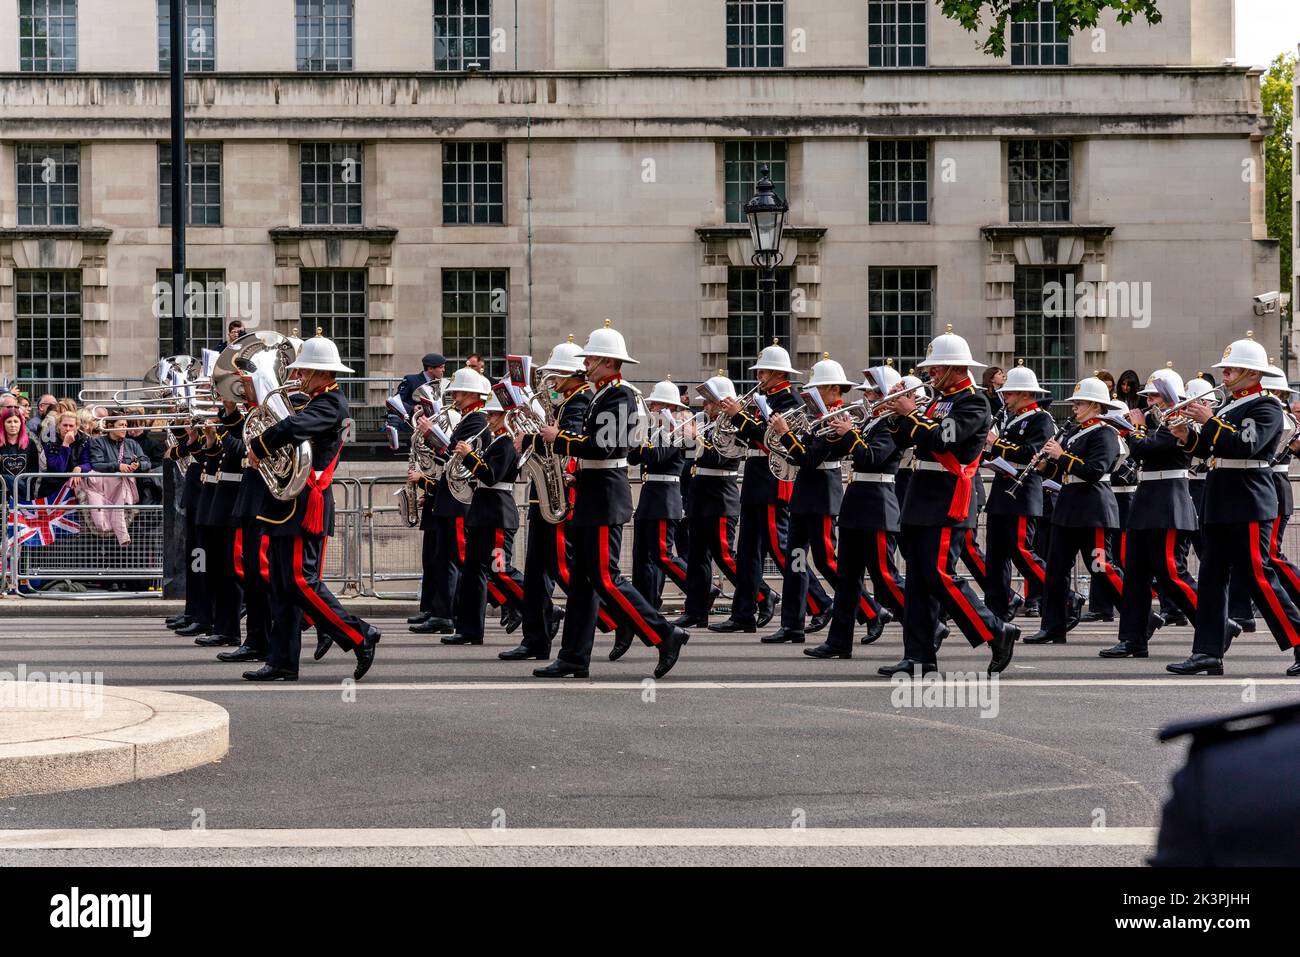 A British Army/Royal Marines Band Performs During The Queen Elizabeth II Funeral Procession, Whitehall, London, UK. Stock Photo